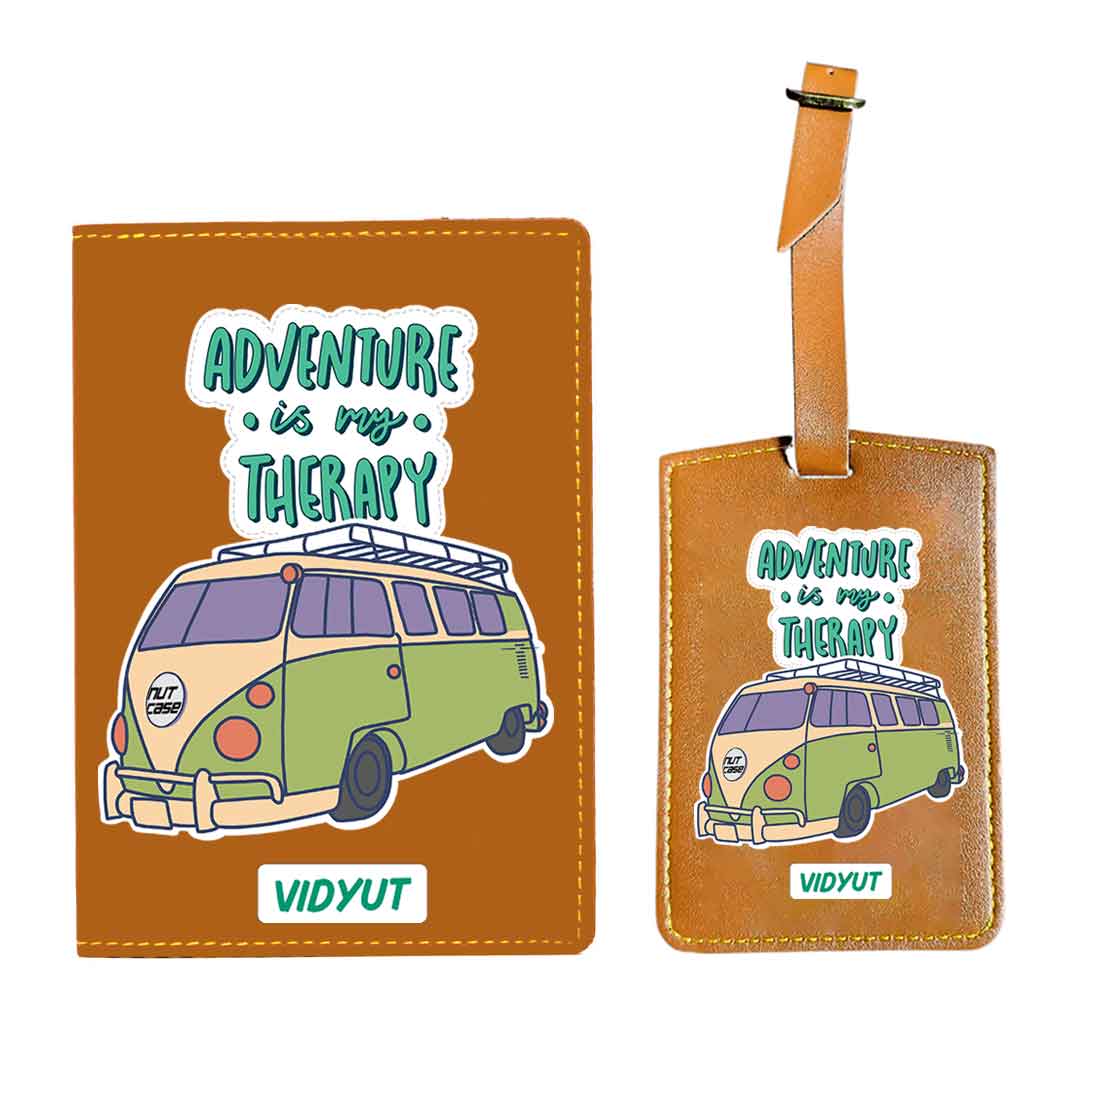 Customised Passport Holder Faux Leather Custom Covers for Passports-Adventure Therapy